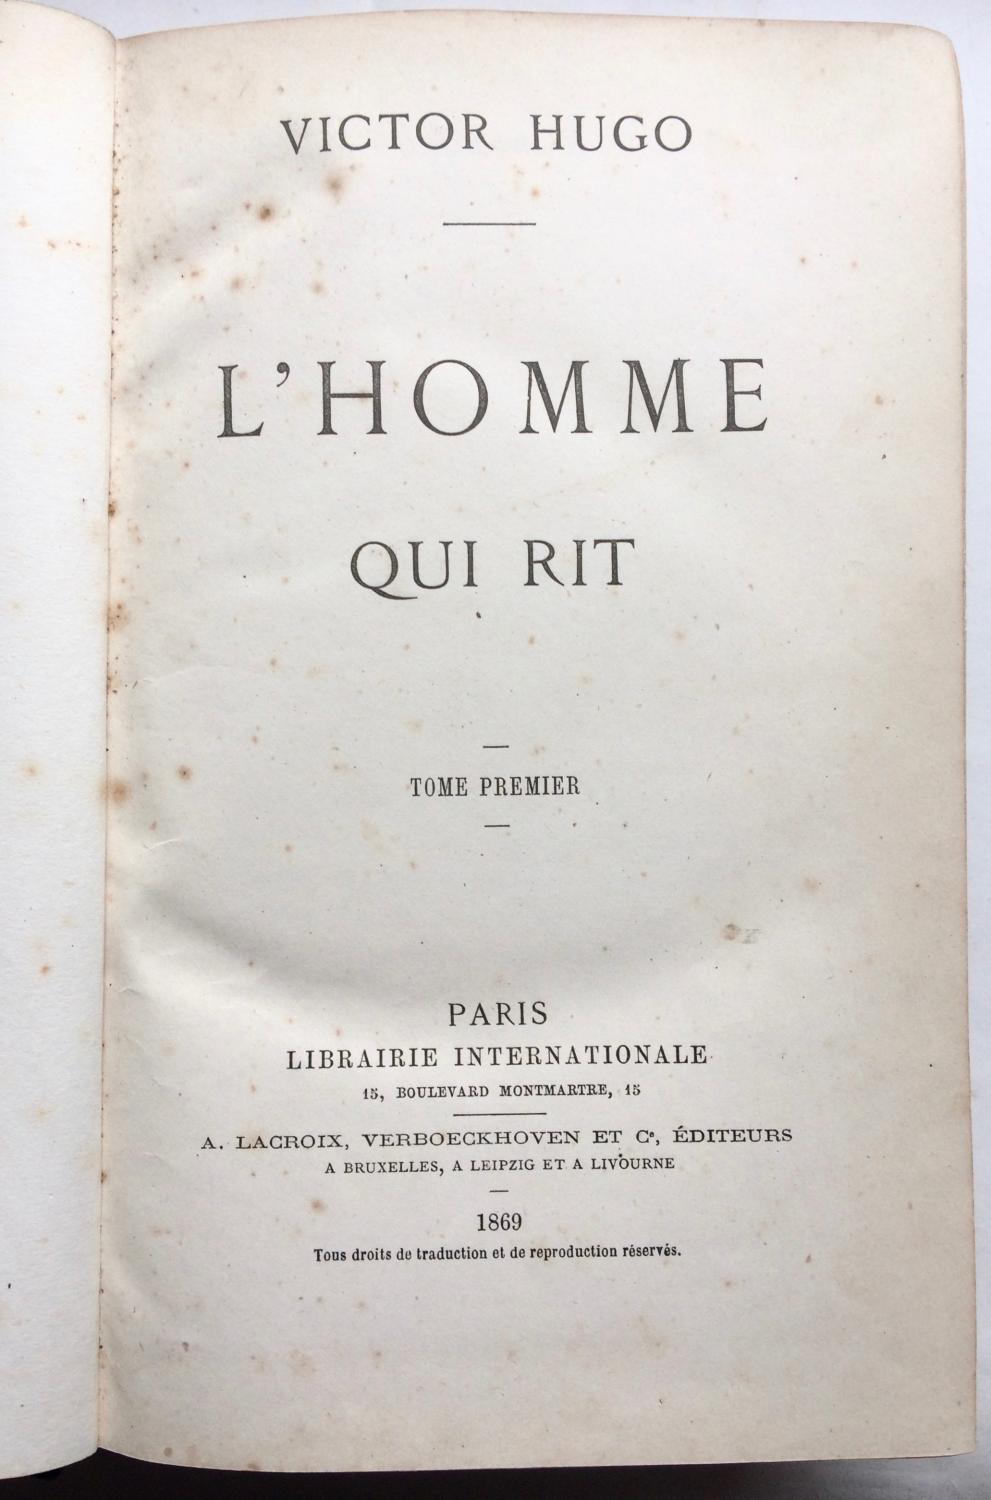 HUGO : L'homme qui rit - First edition 